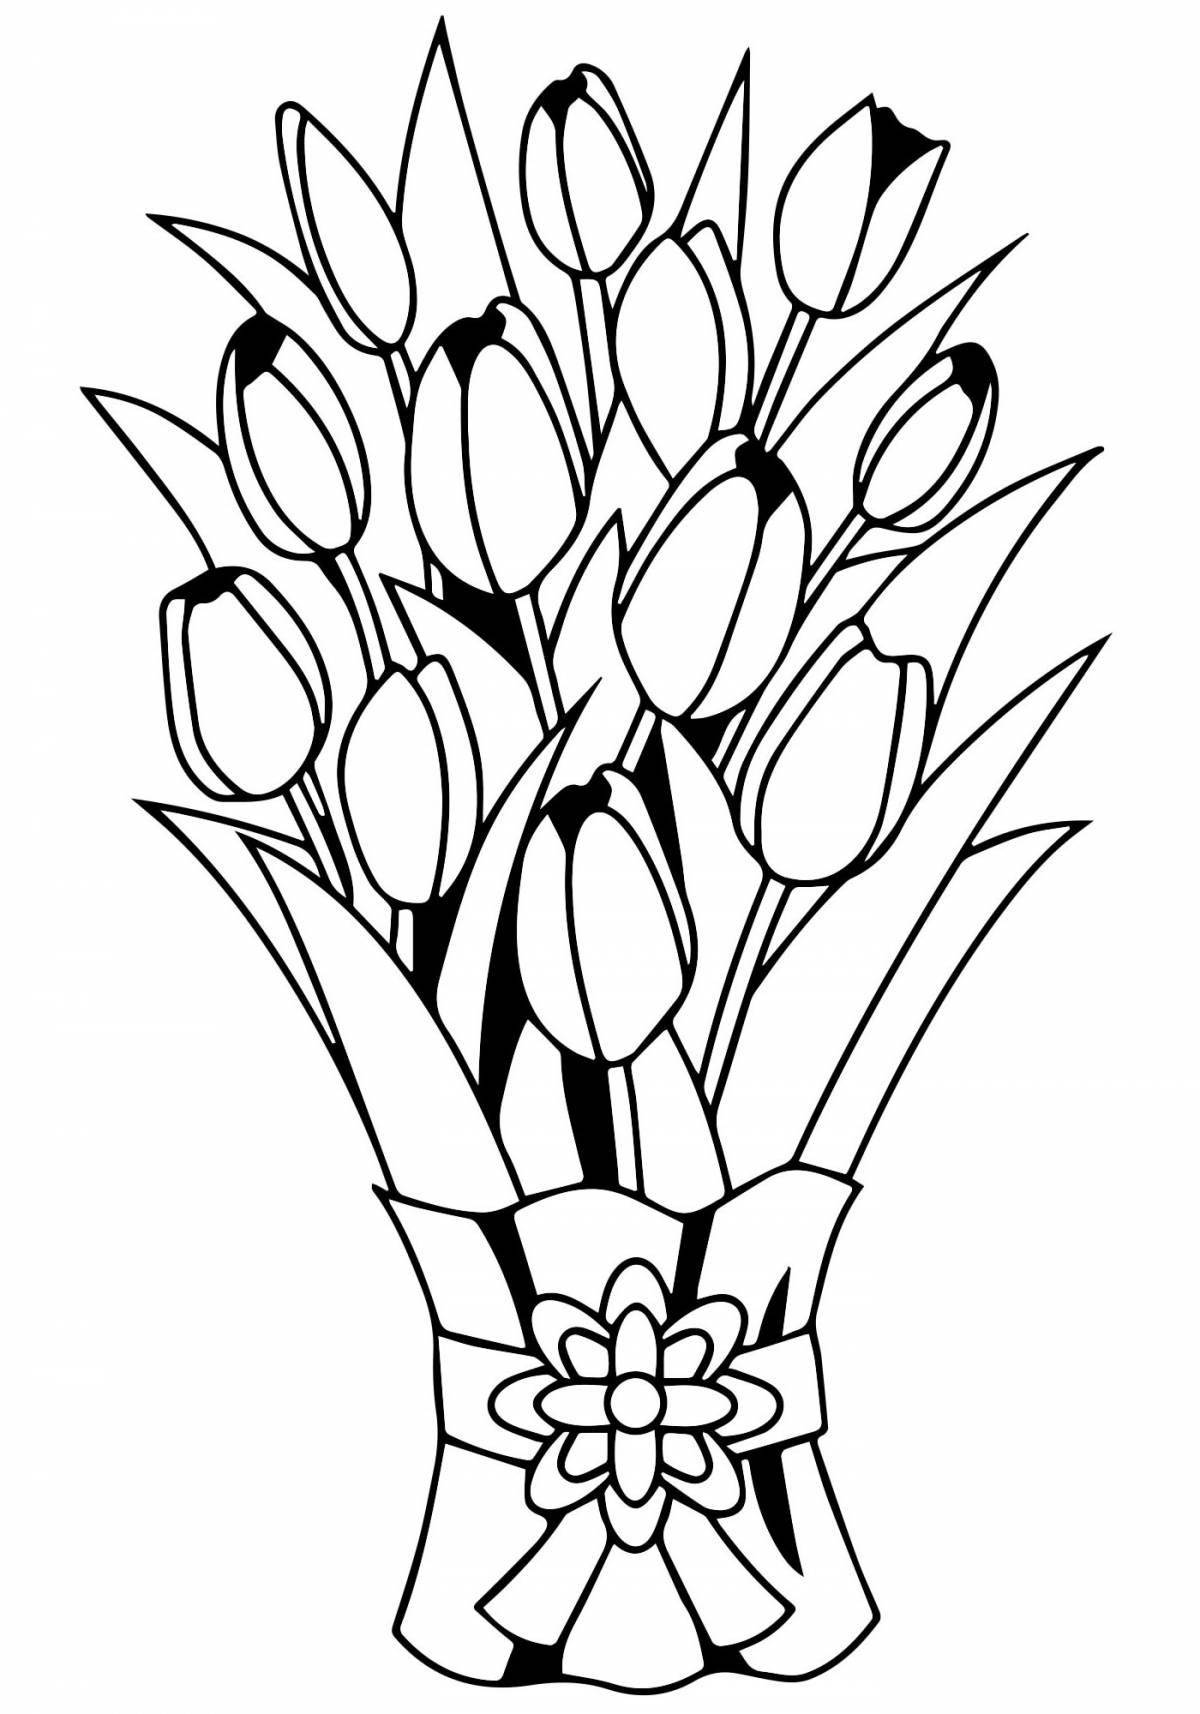 Coloring book gorgeous bouquet of tulips